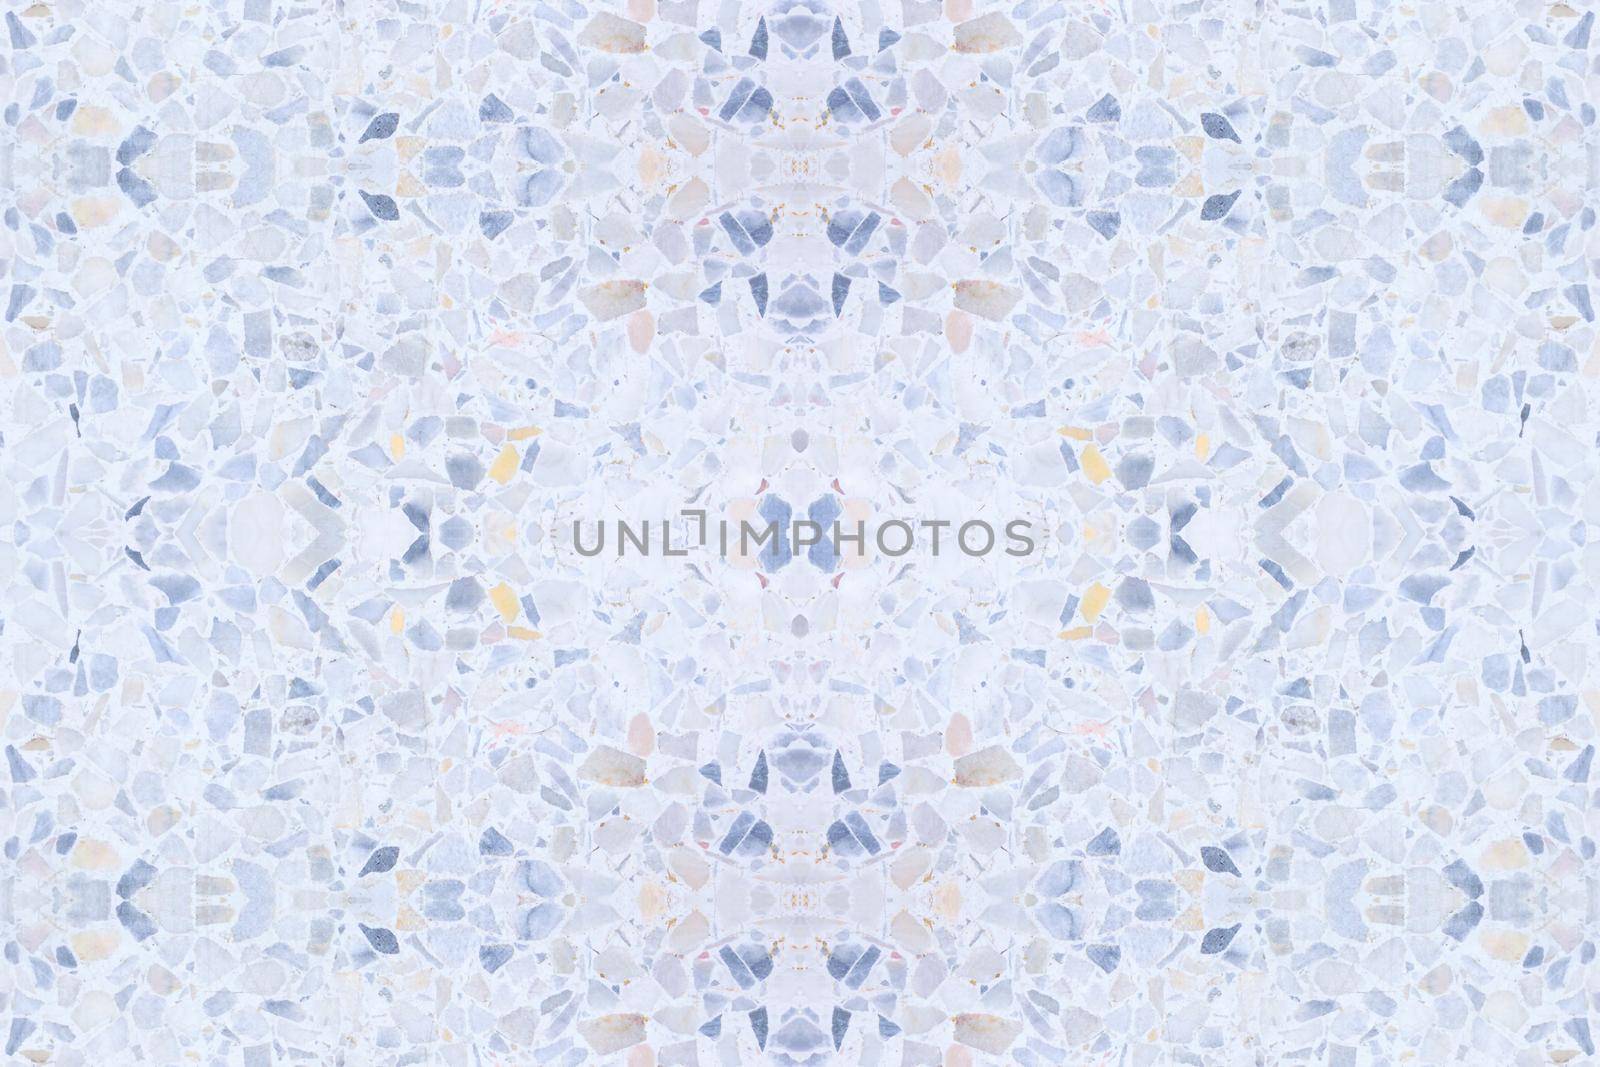 terrazzo flooring seamless Design Patterns, marble old texture or polished stone art background beautiful by pramot